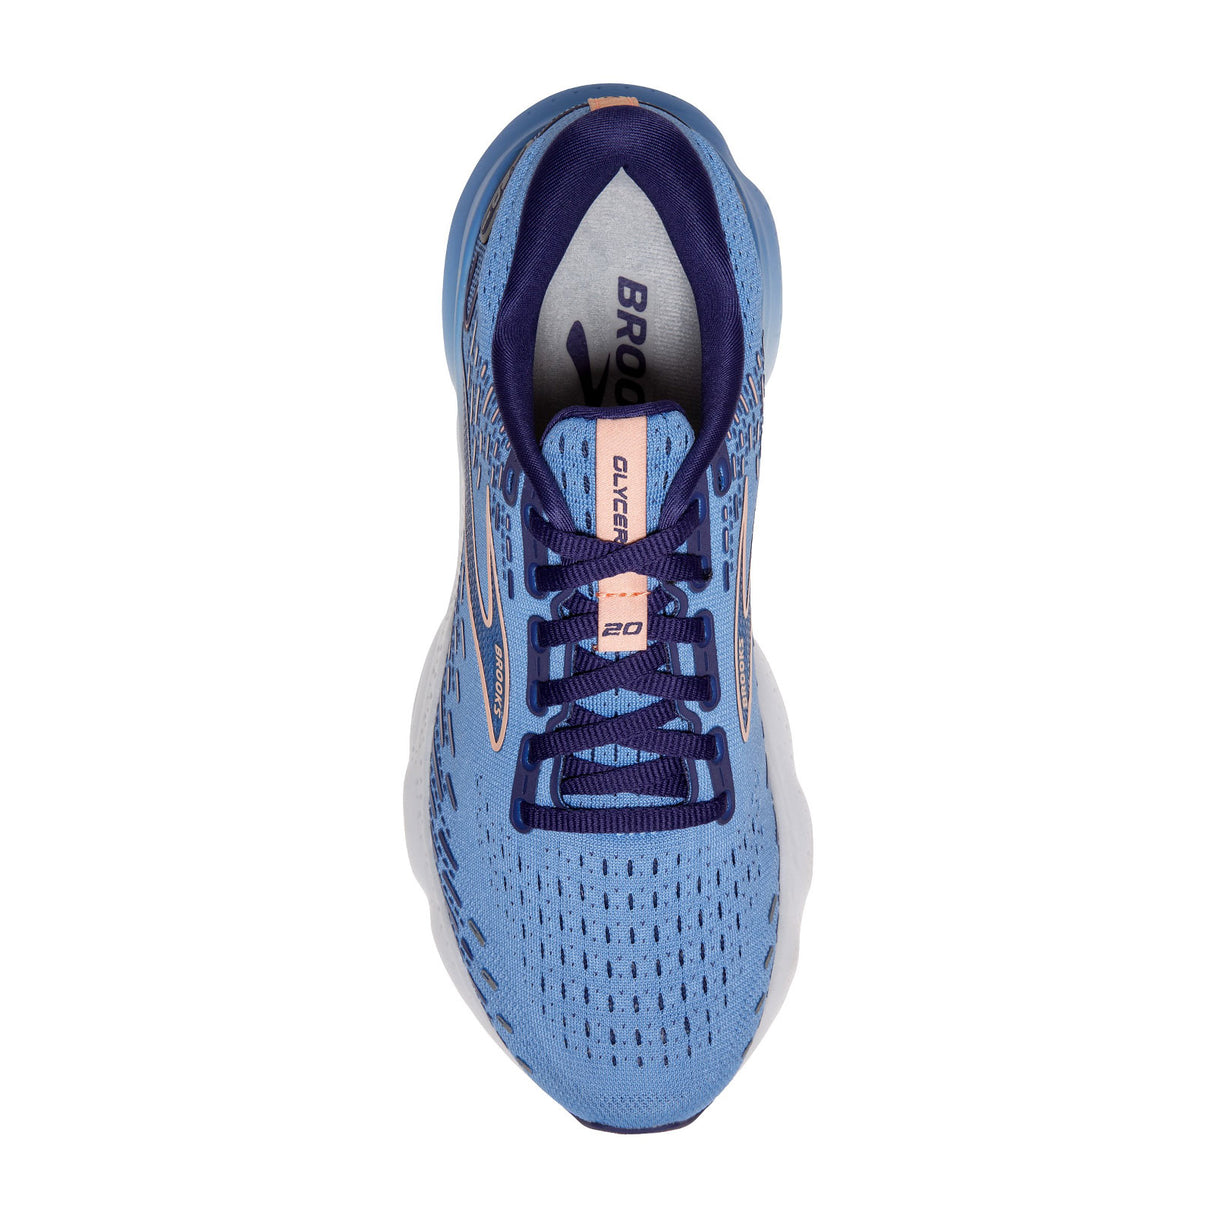 Brooks Glycerin 20 (Women) - Blissful Blue/Peach/White Athletic - Running - Stability - The Heel Shoe Fitters